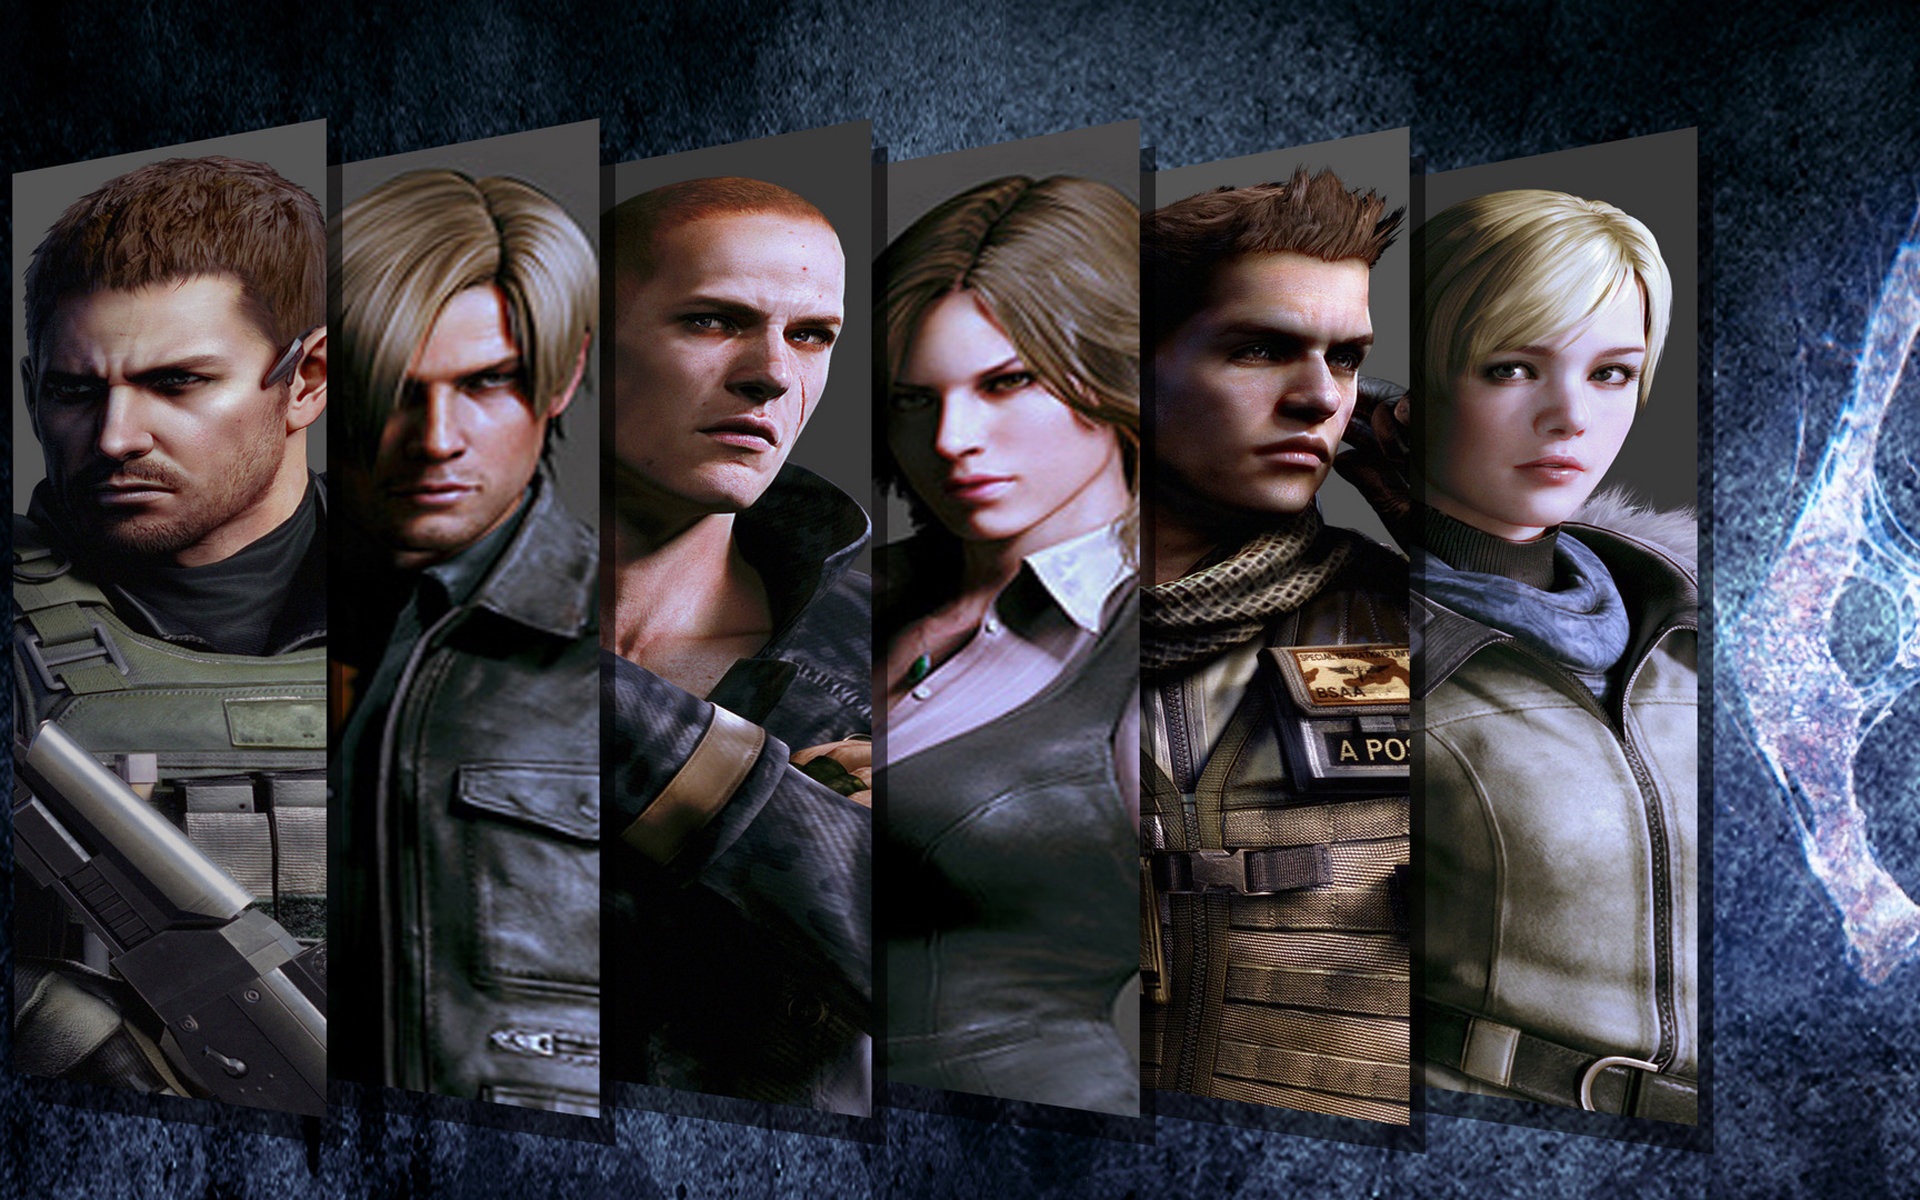 Resident Evil 6 HD game wallpapers #2 - 1920x1200